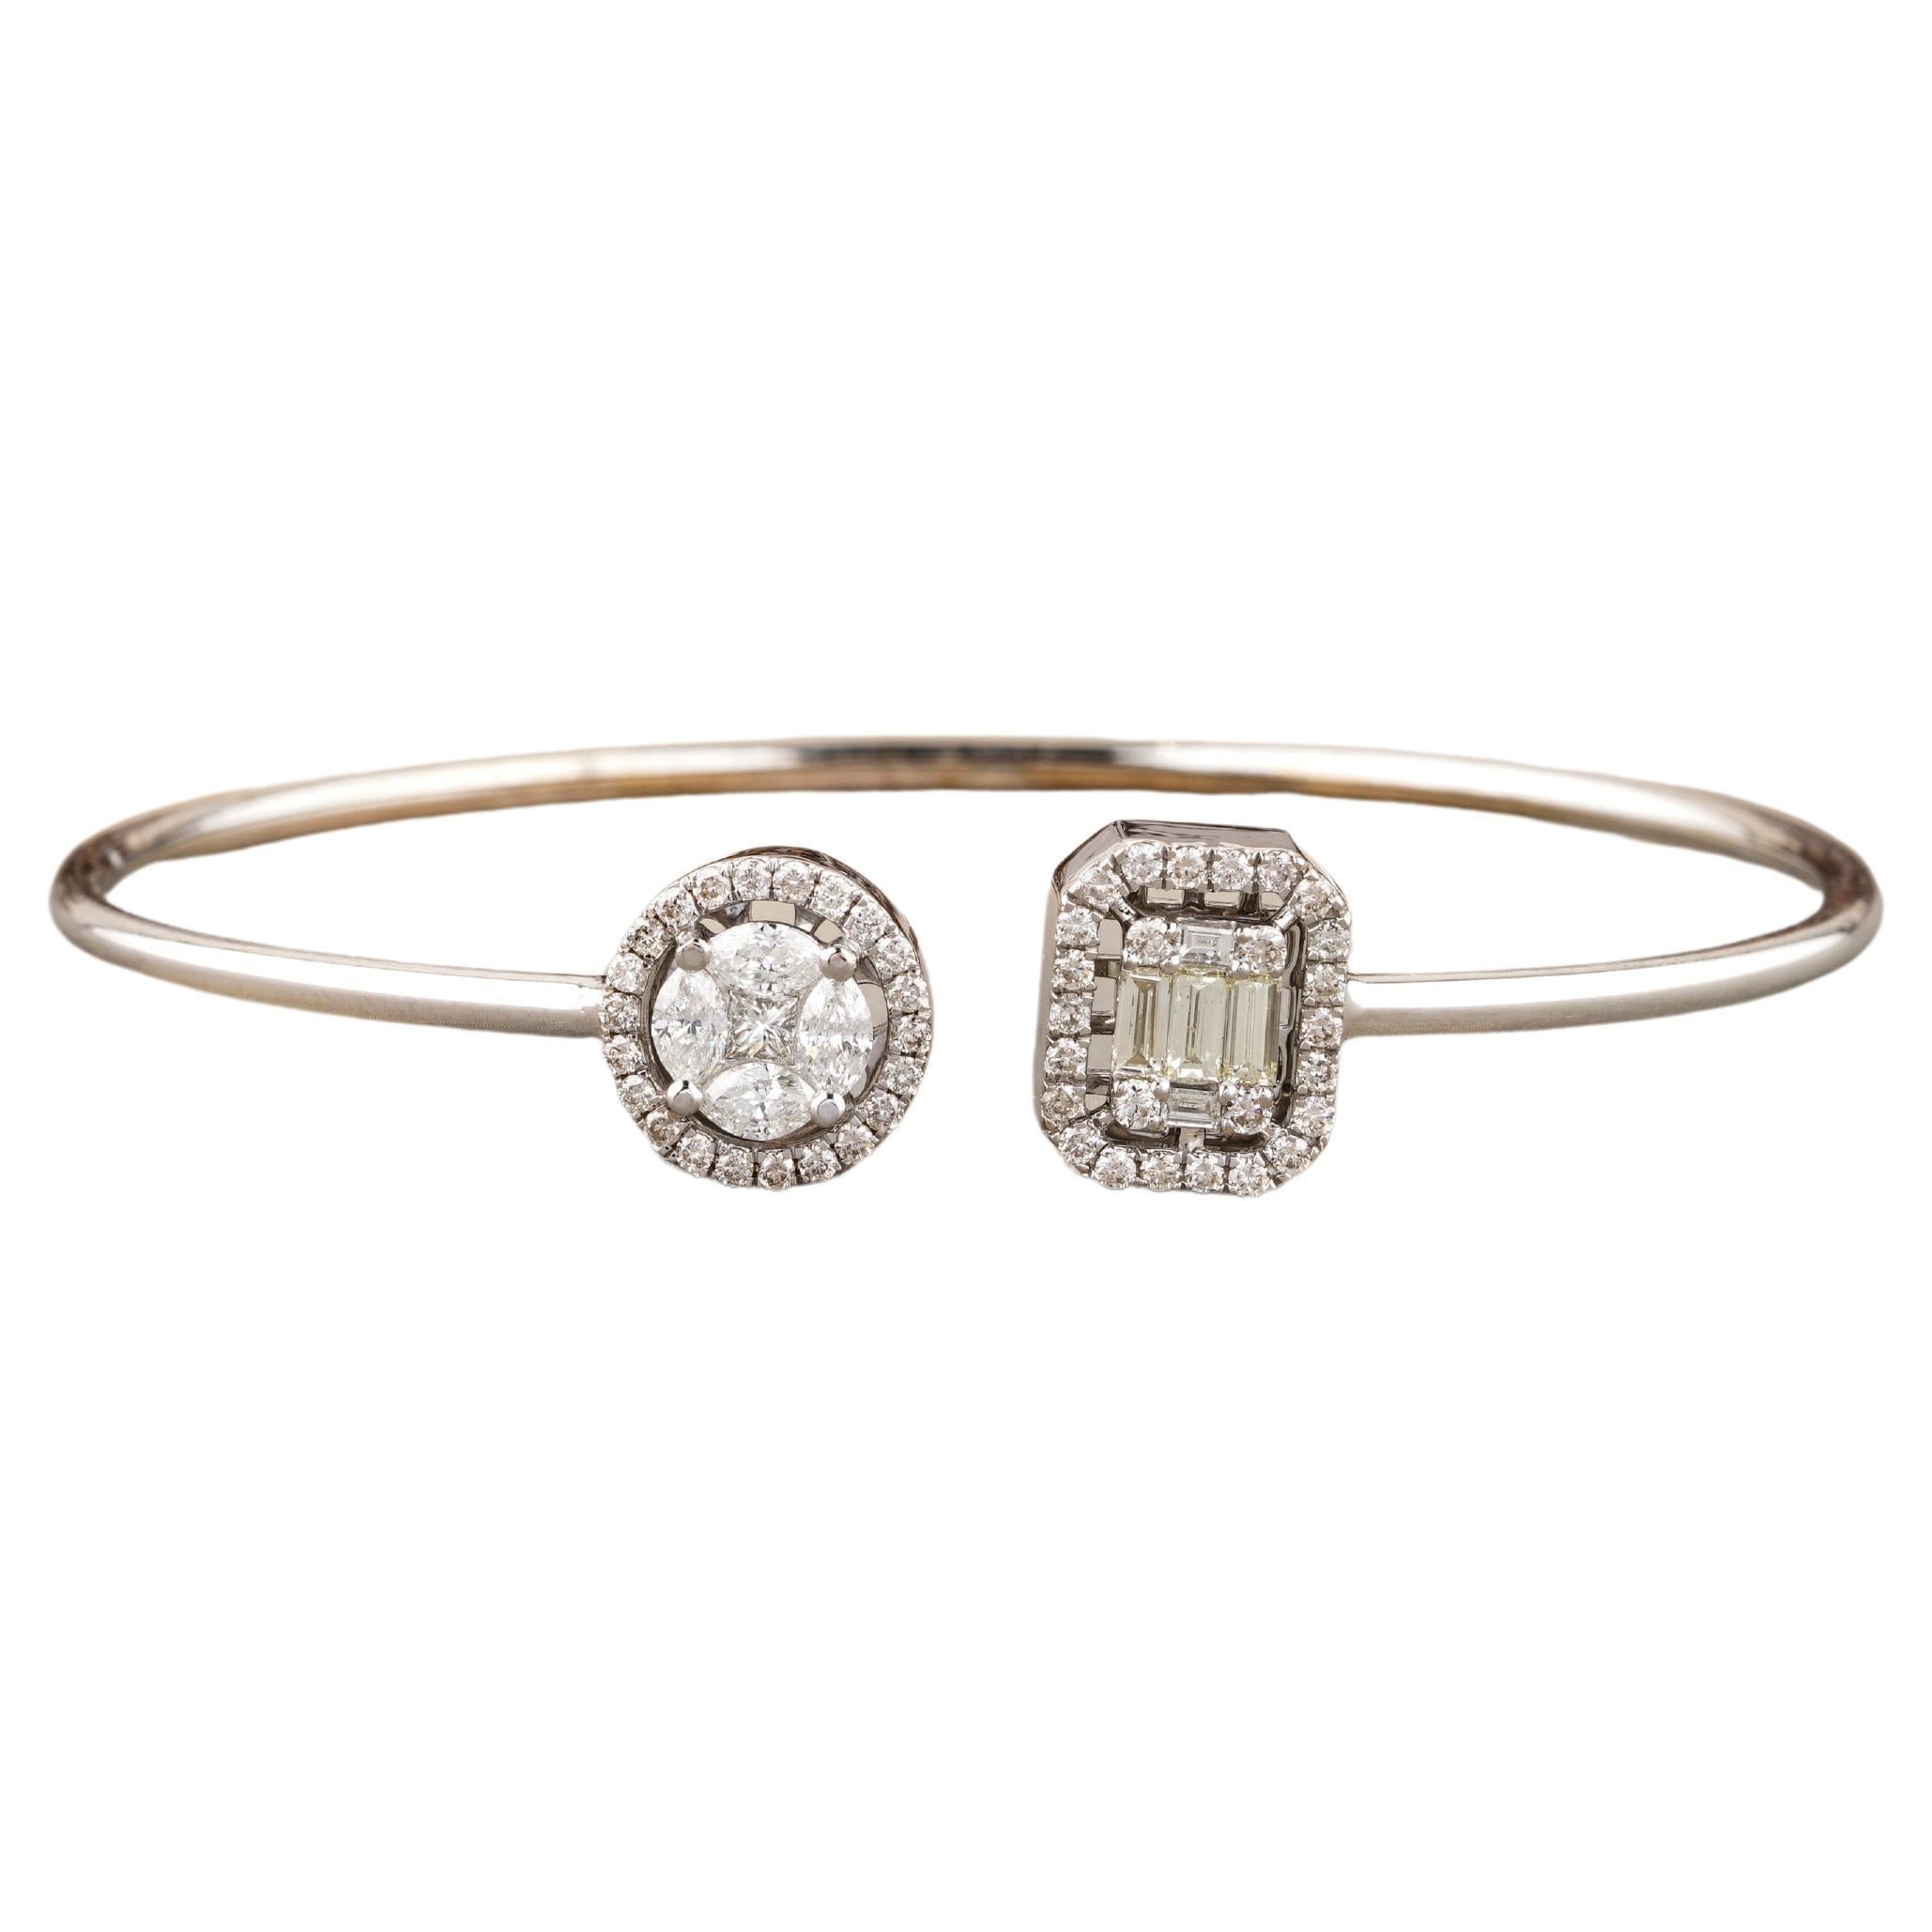 Fancy Diamond Halo Diamond Cuff Bracelet With Illusion Setting in 18k Solid Gold For Sale